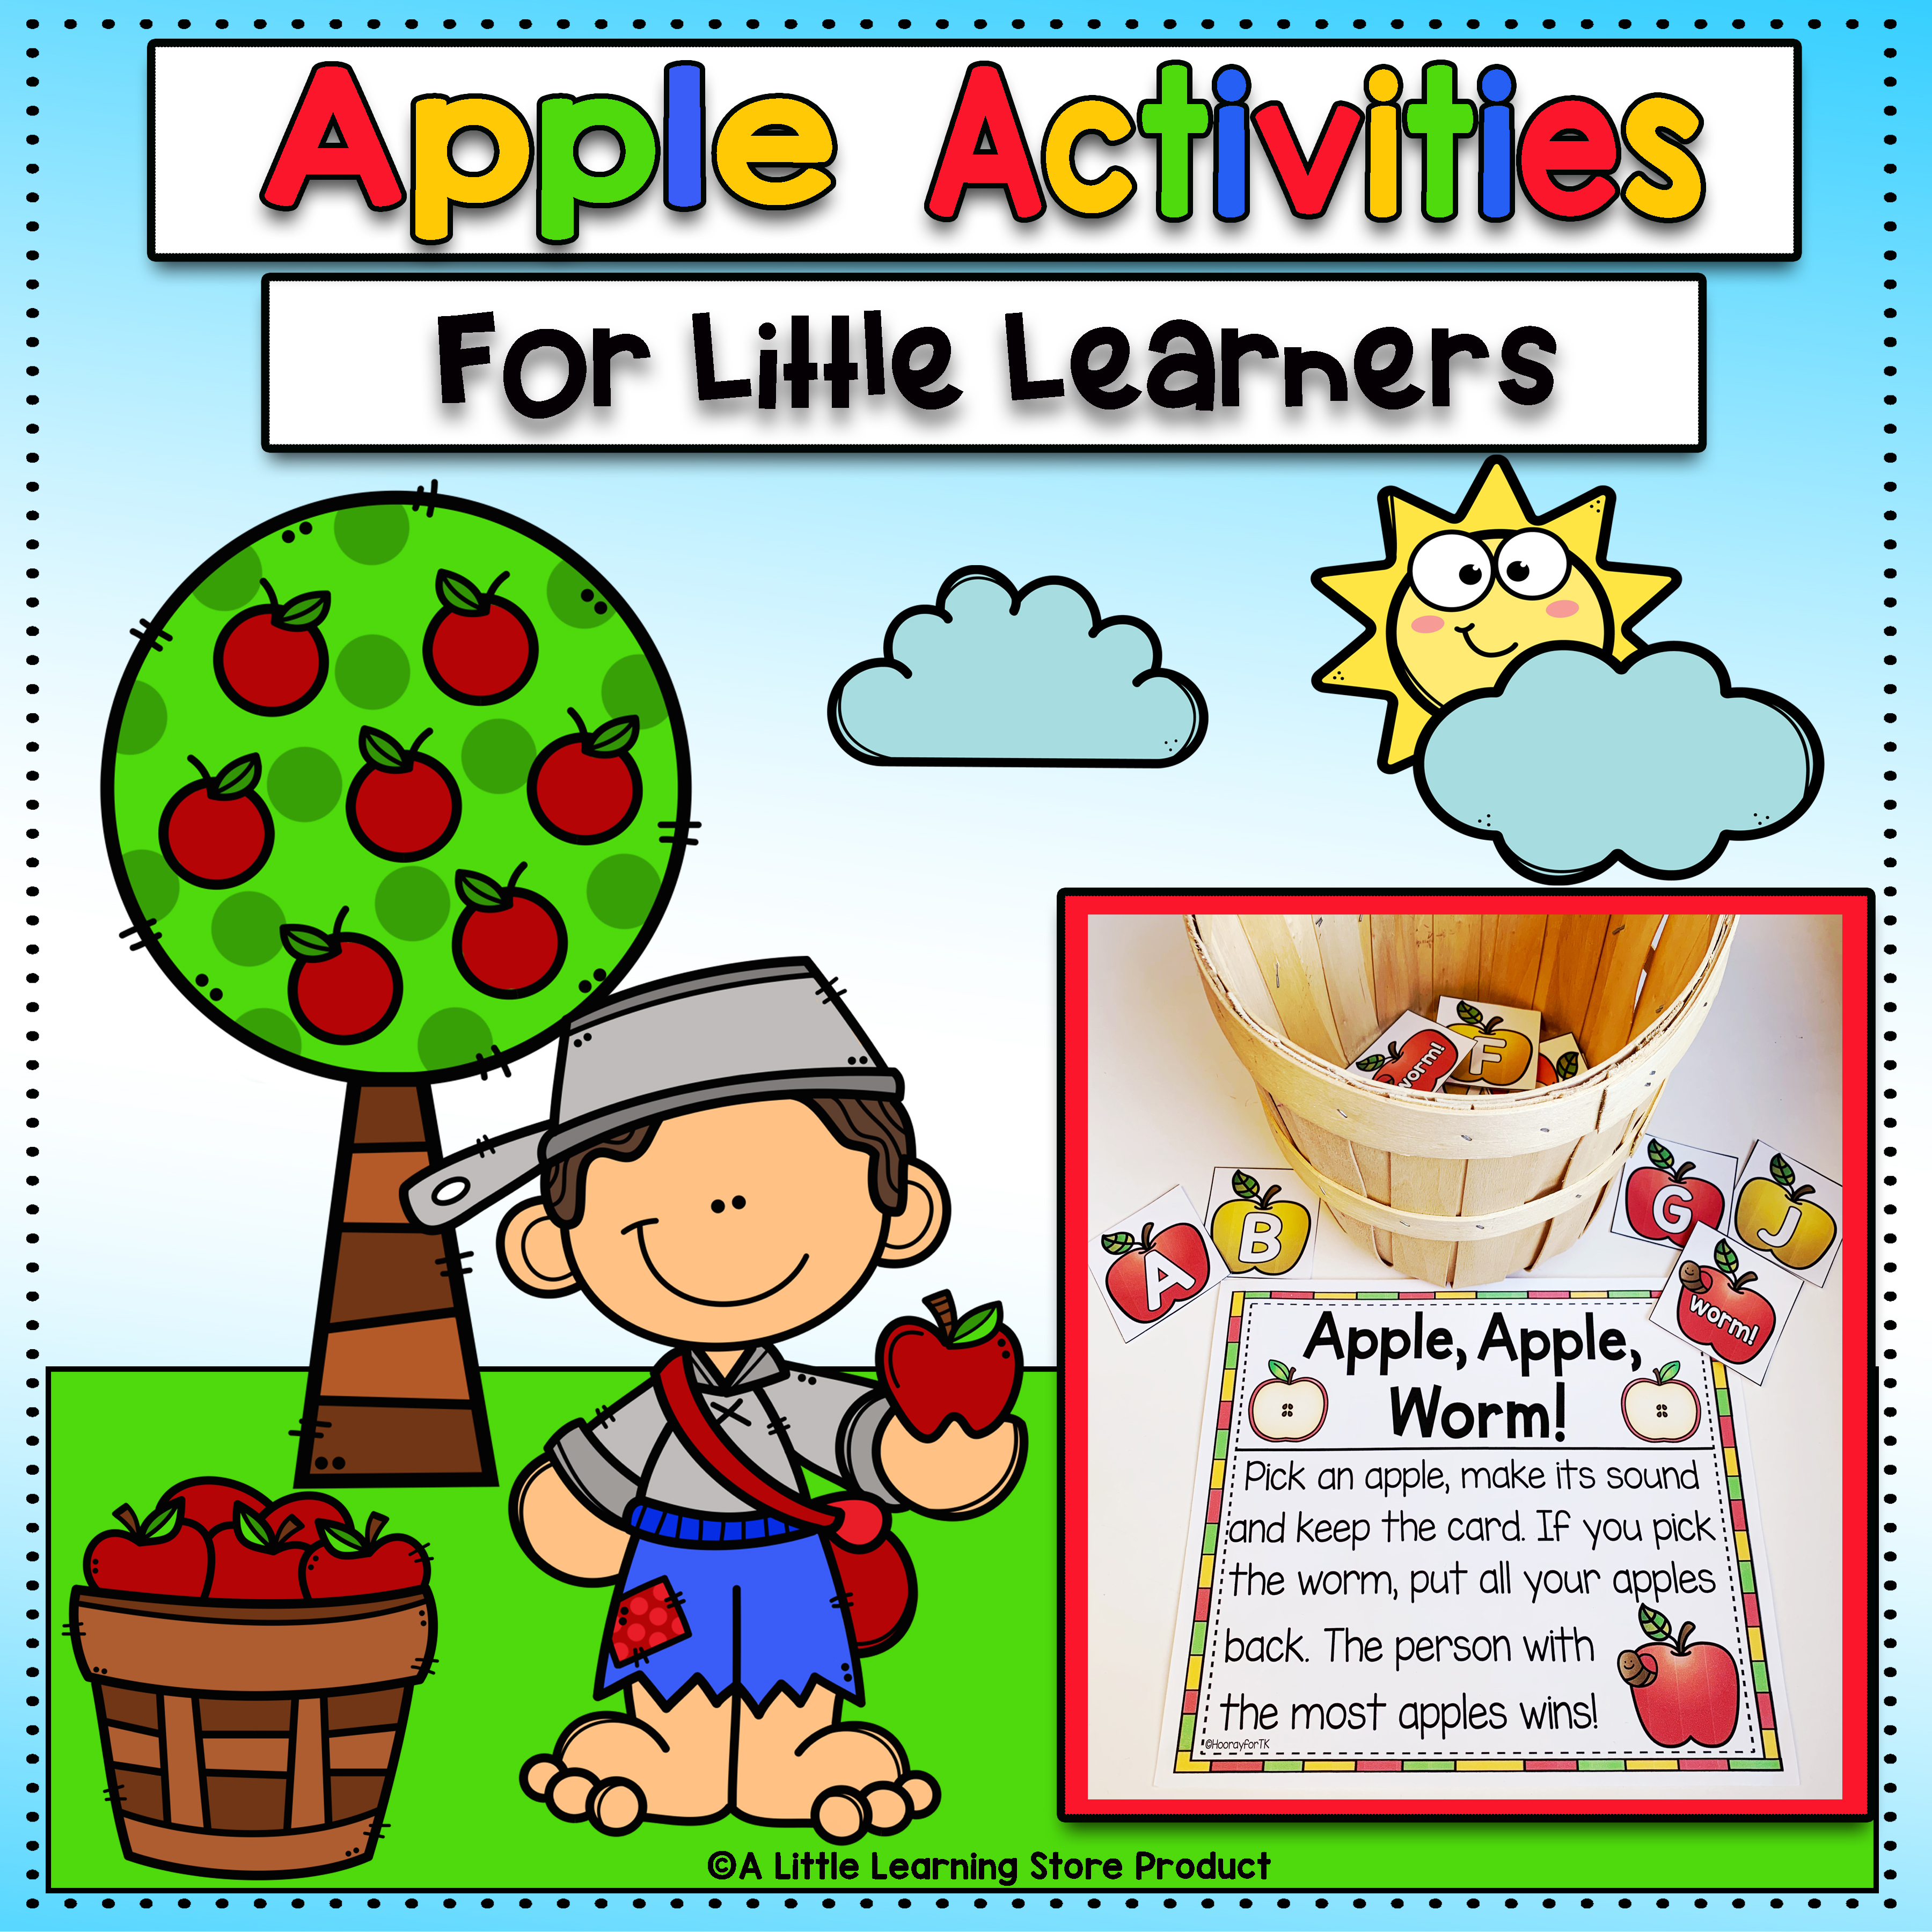 Apple Activities for Little Learners